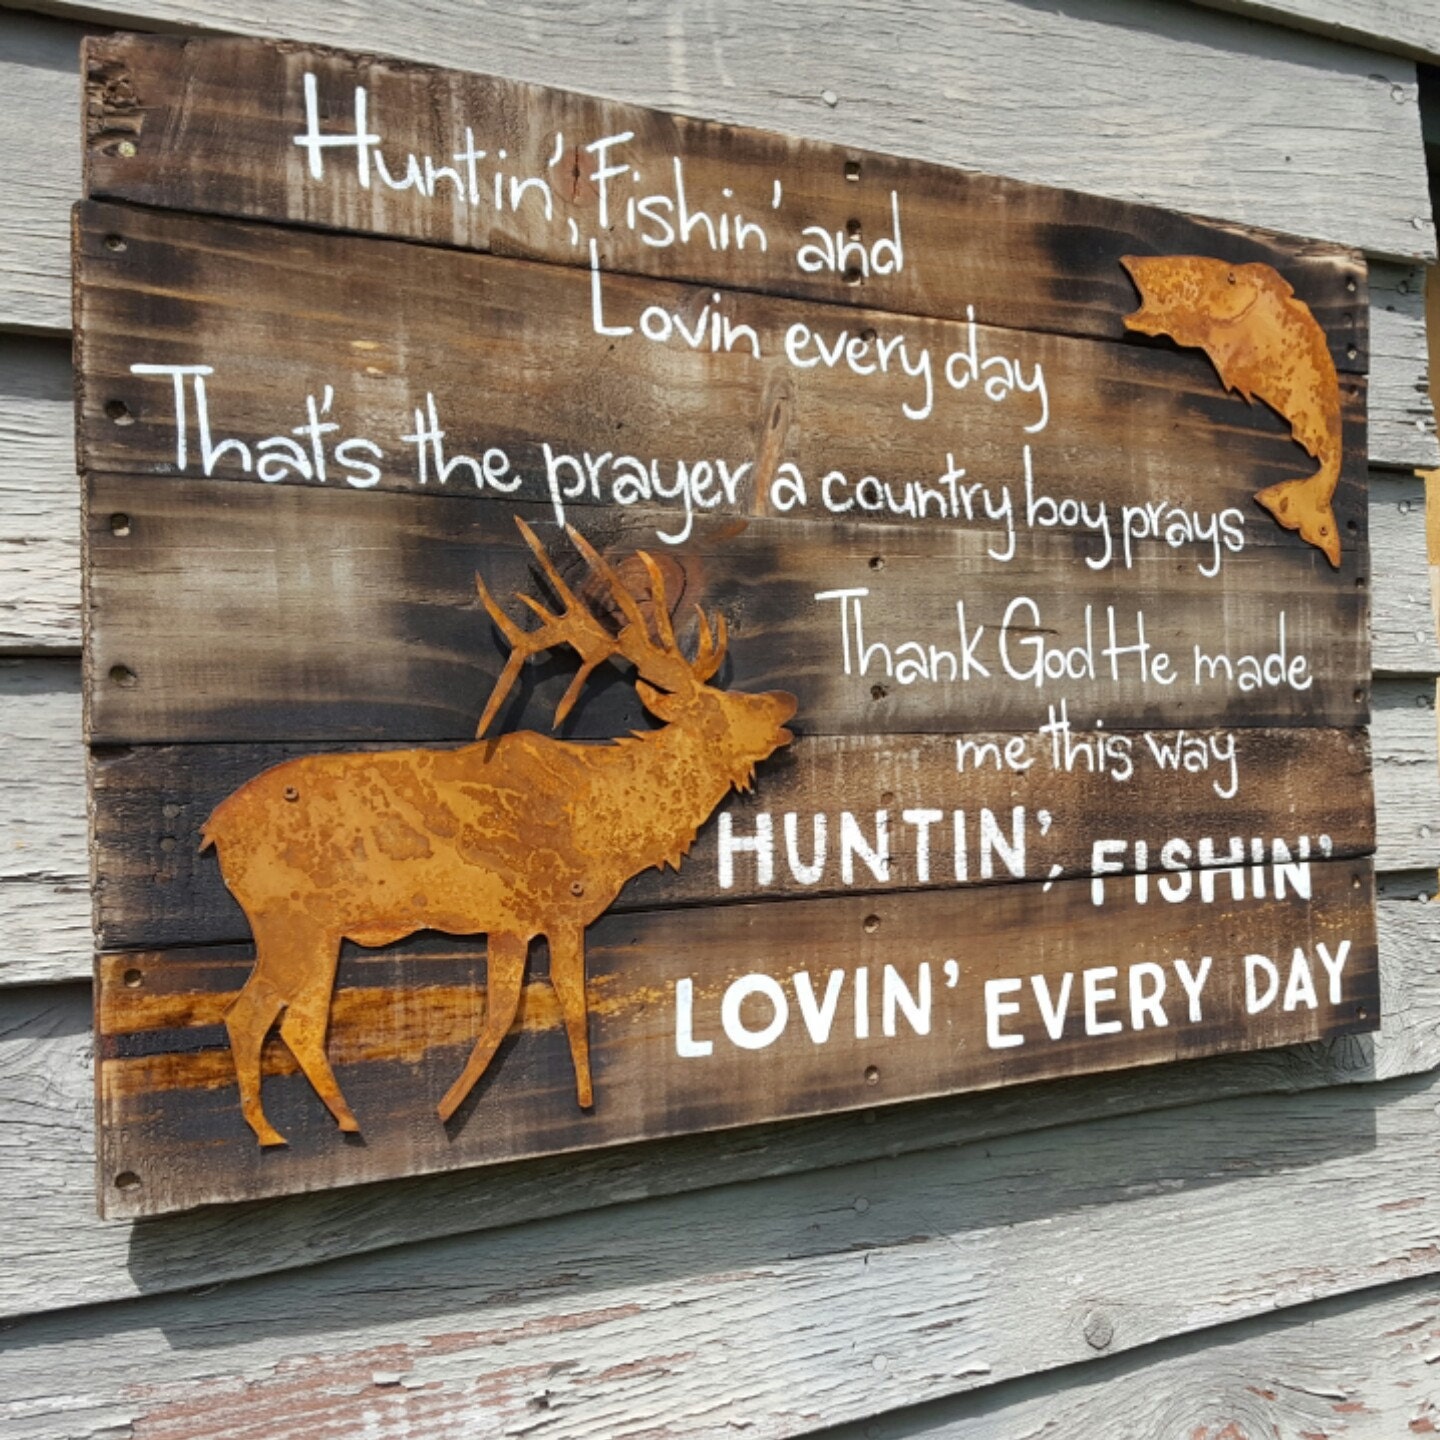 Huntin' Fishin' Lovin' every day Rustic Wood Sign by ...